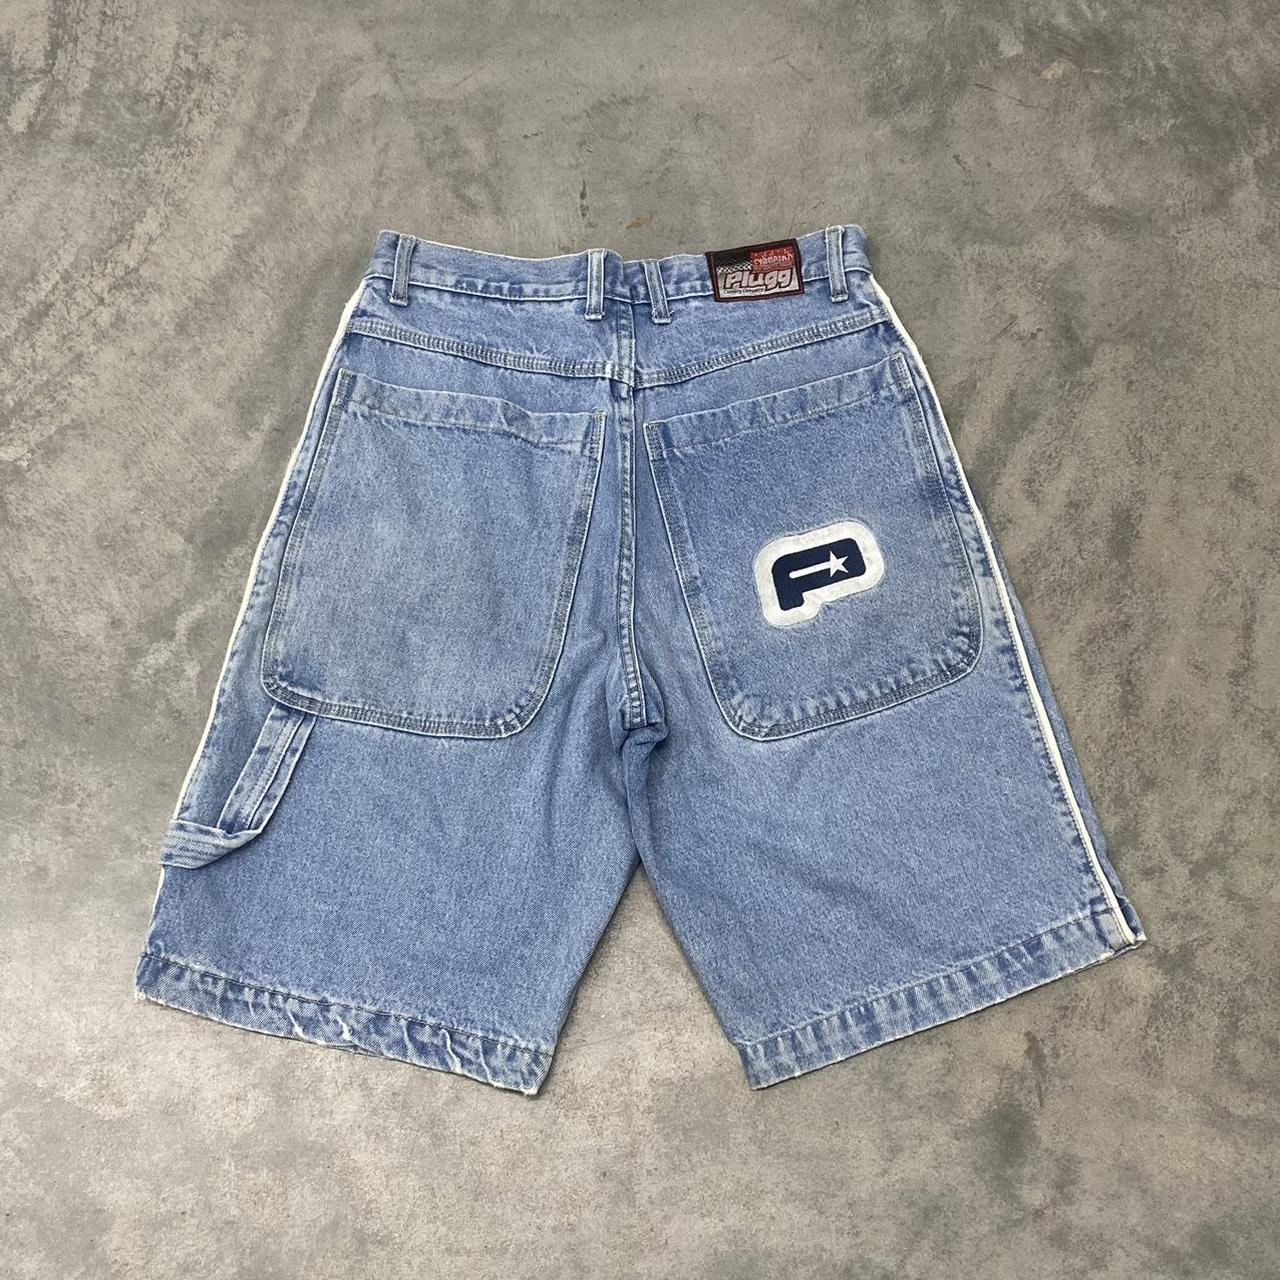 Y2k Jnco Style Baggy Jorts 31 waist Condition... - Depop